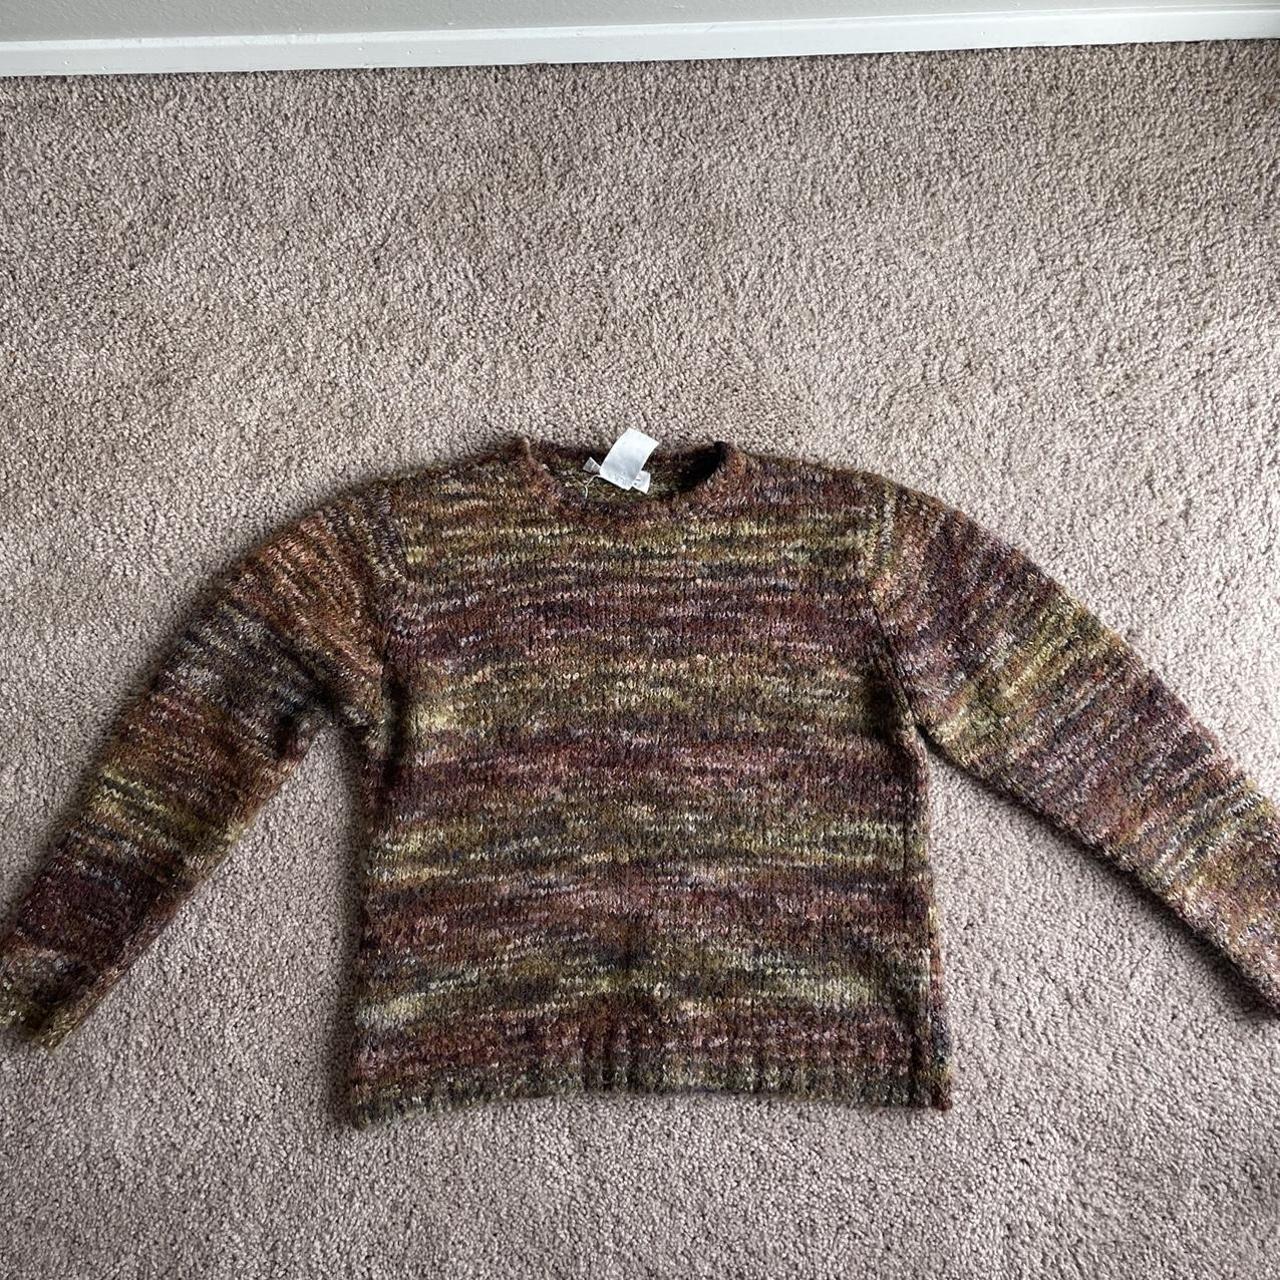 vintage sweater tag says small, would say fits like... - Depop